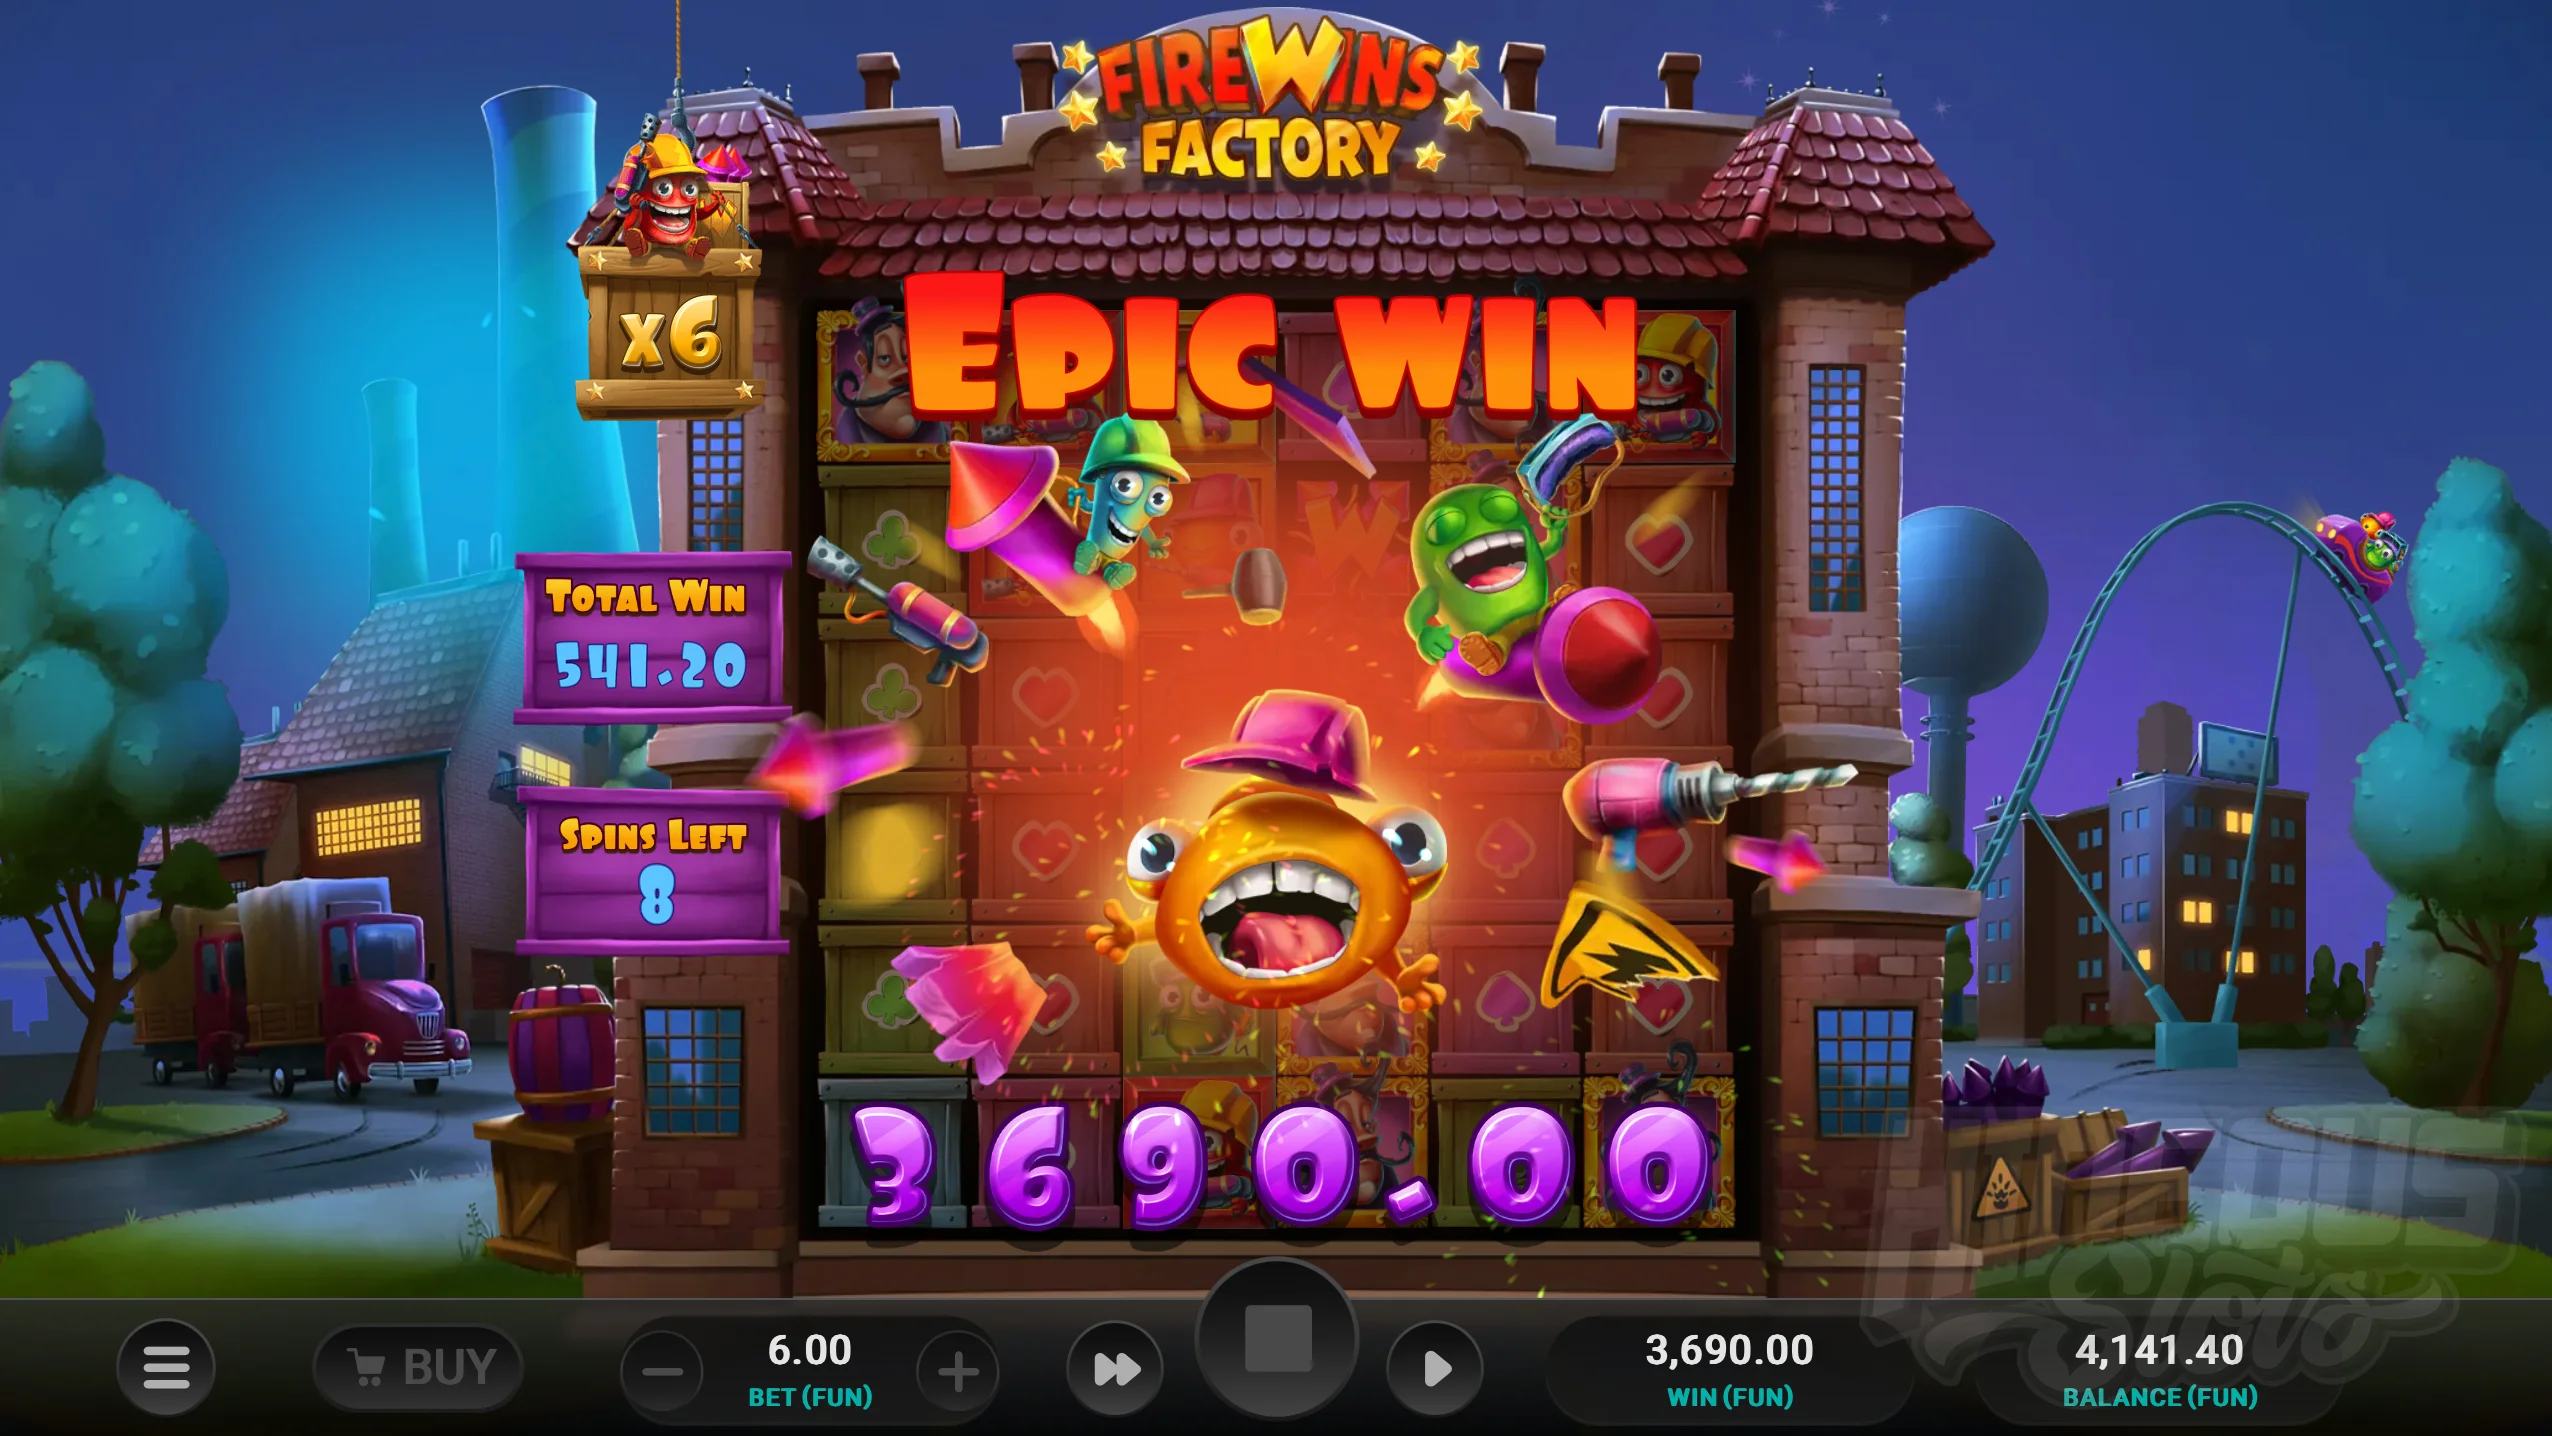 When an Explosive Wild is Part of a Winning Combination the Multiplier Increases By +1, and this Multiplier Does Not Reset During Free Spins